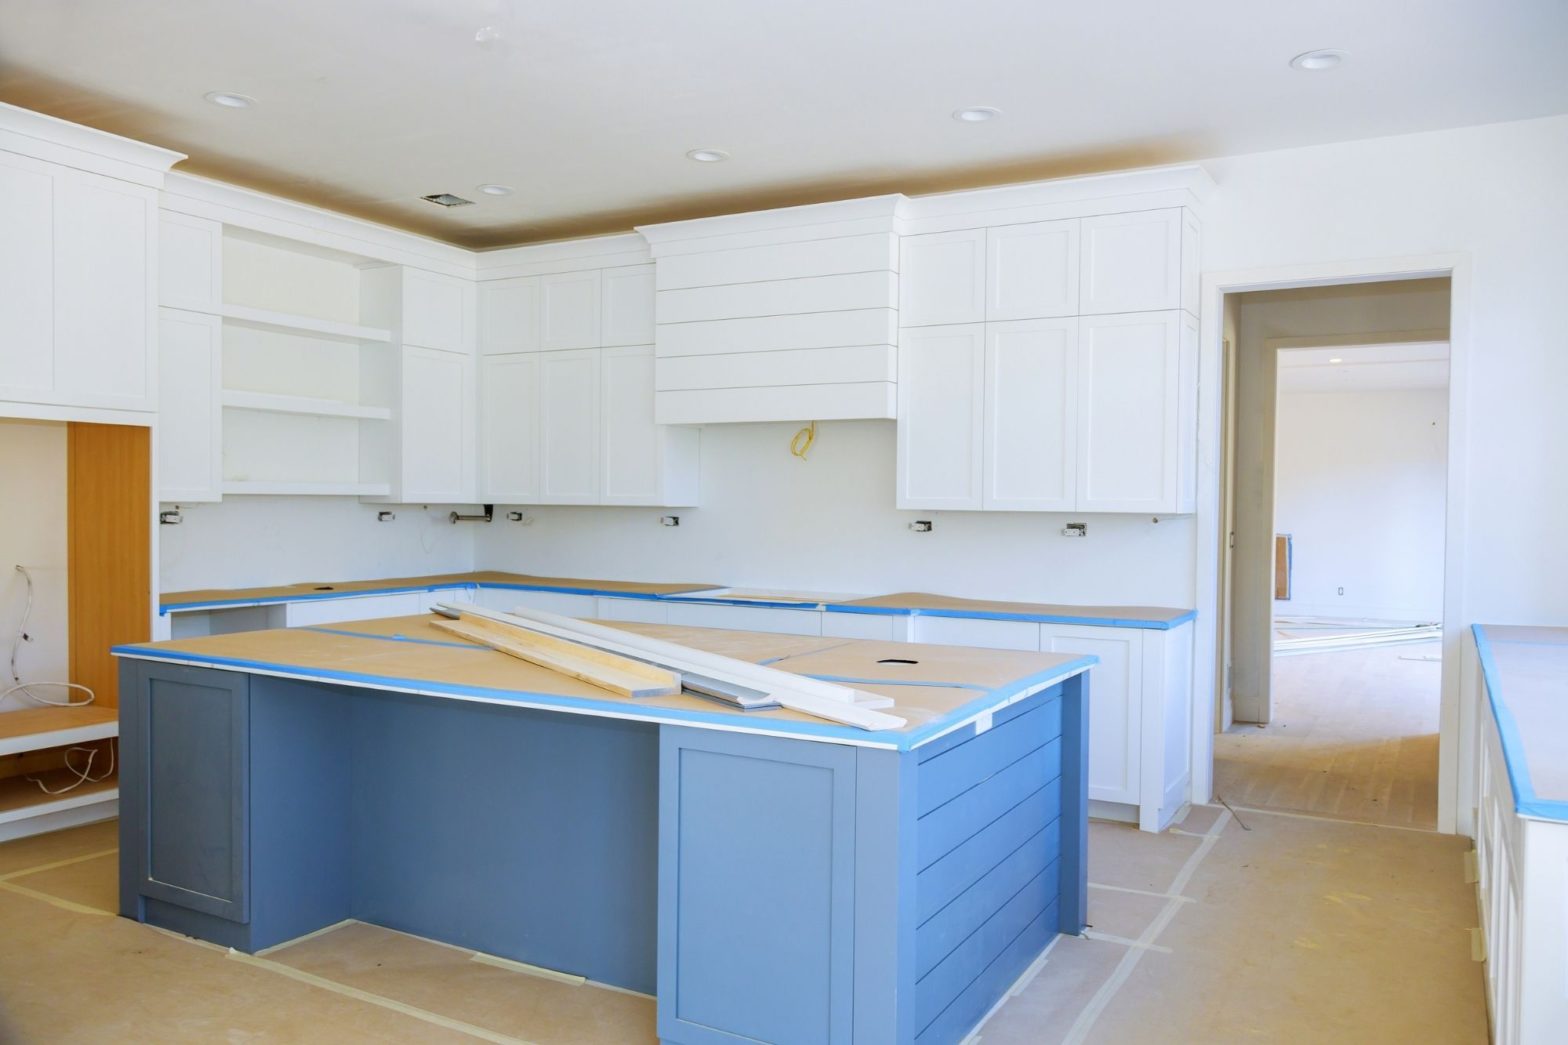 Make Your Portland Kitchen Shine by Employing Kitchen Designers Who Will Do an Amazing Job!